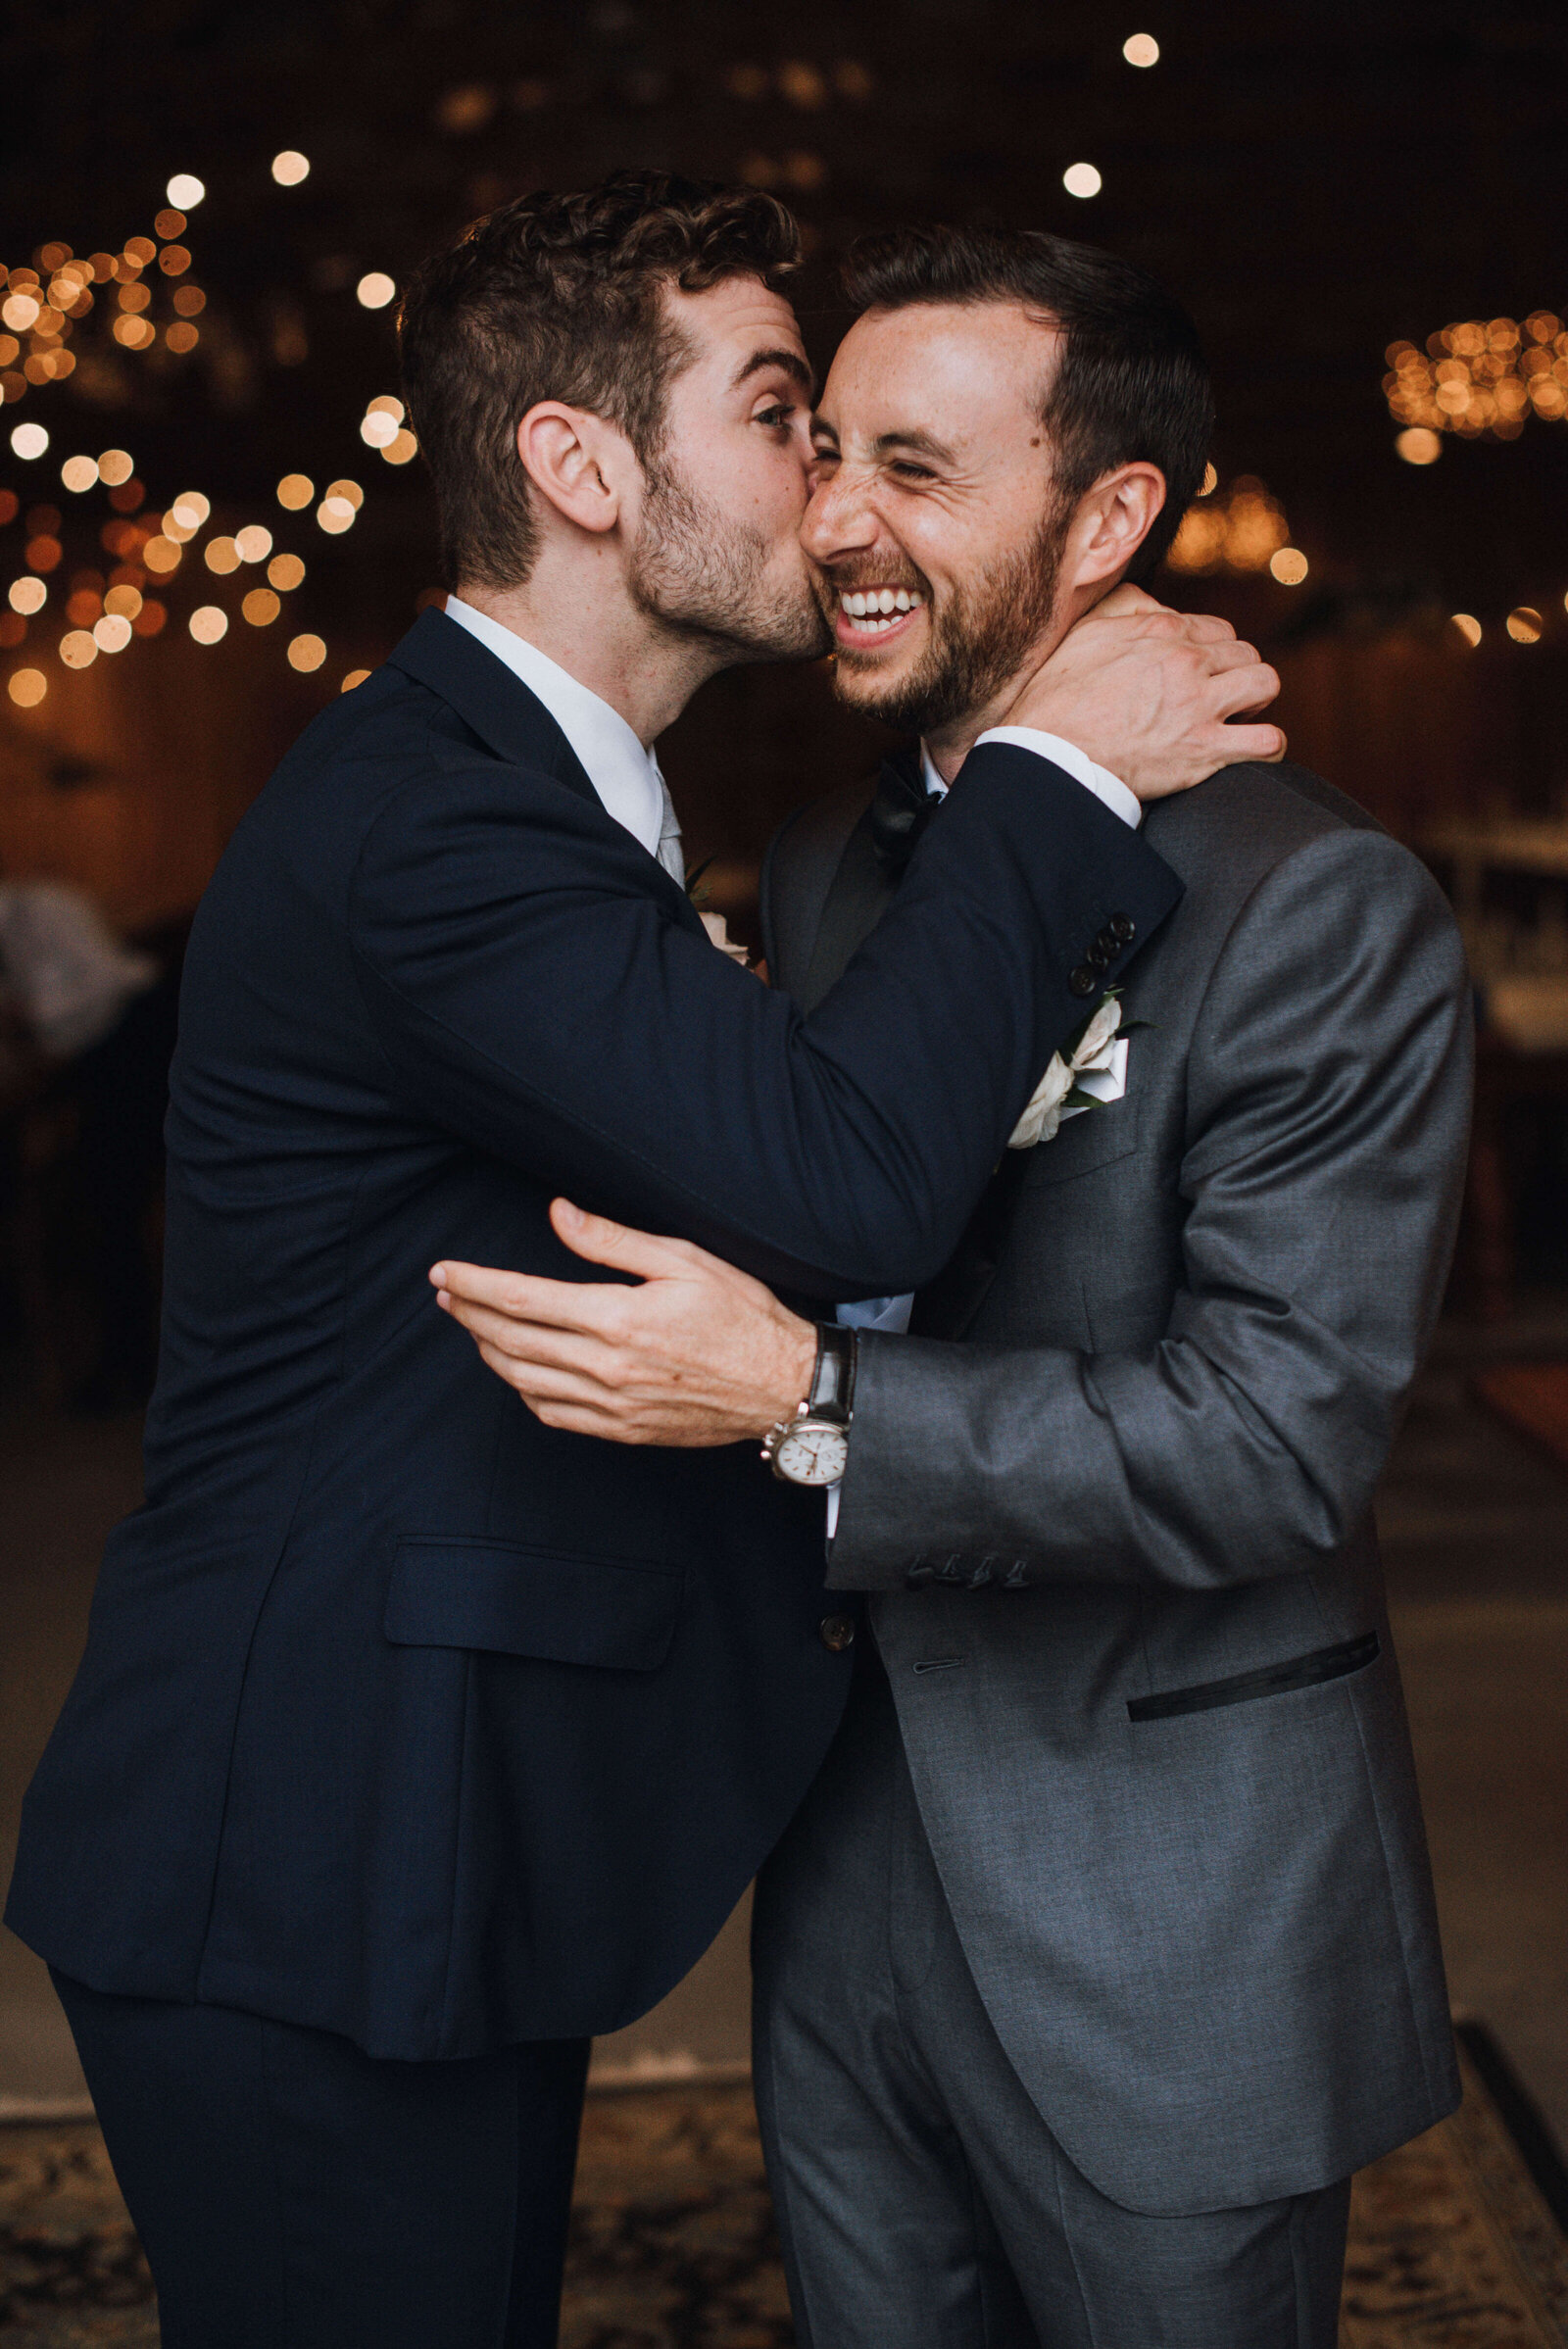 A laughing groom getting a playful kiss on the cheek from a groomsman